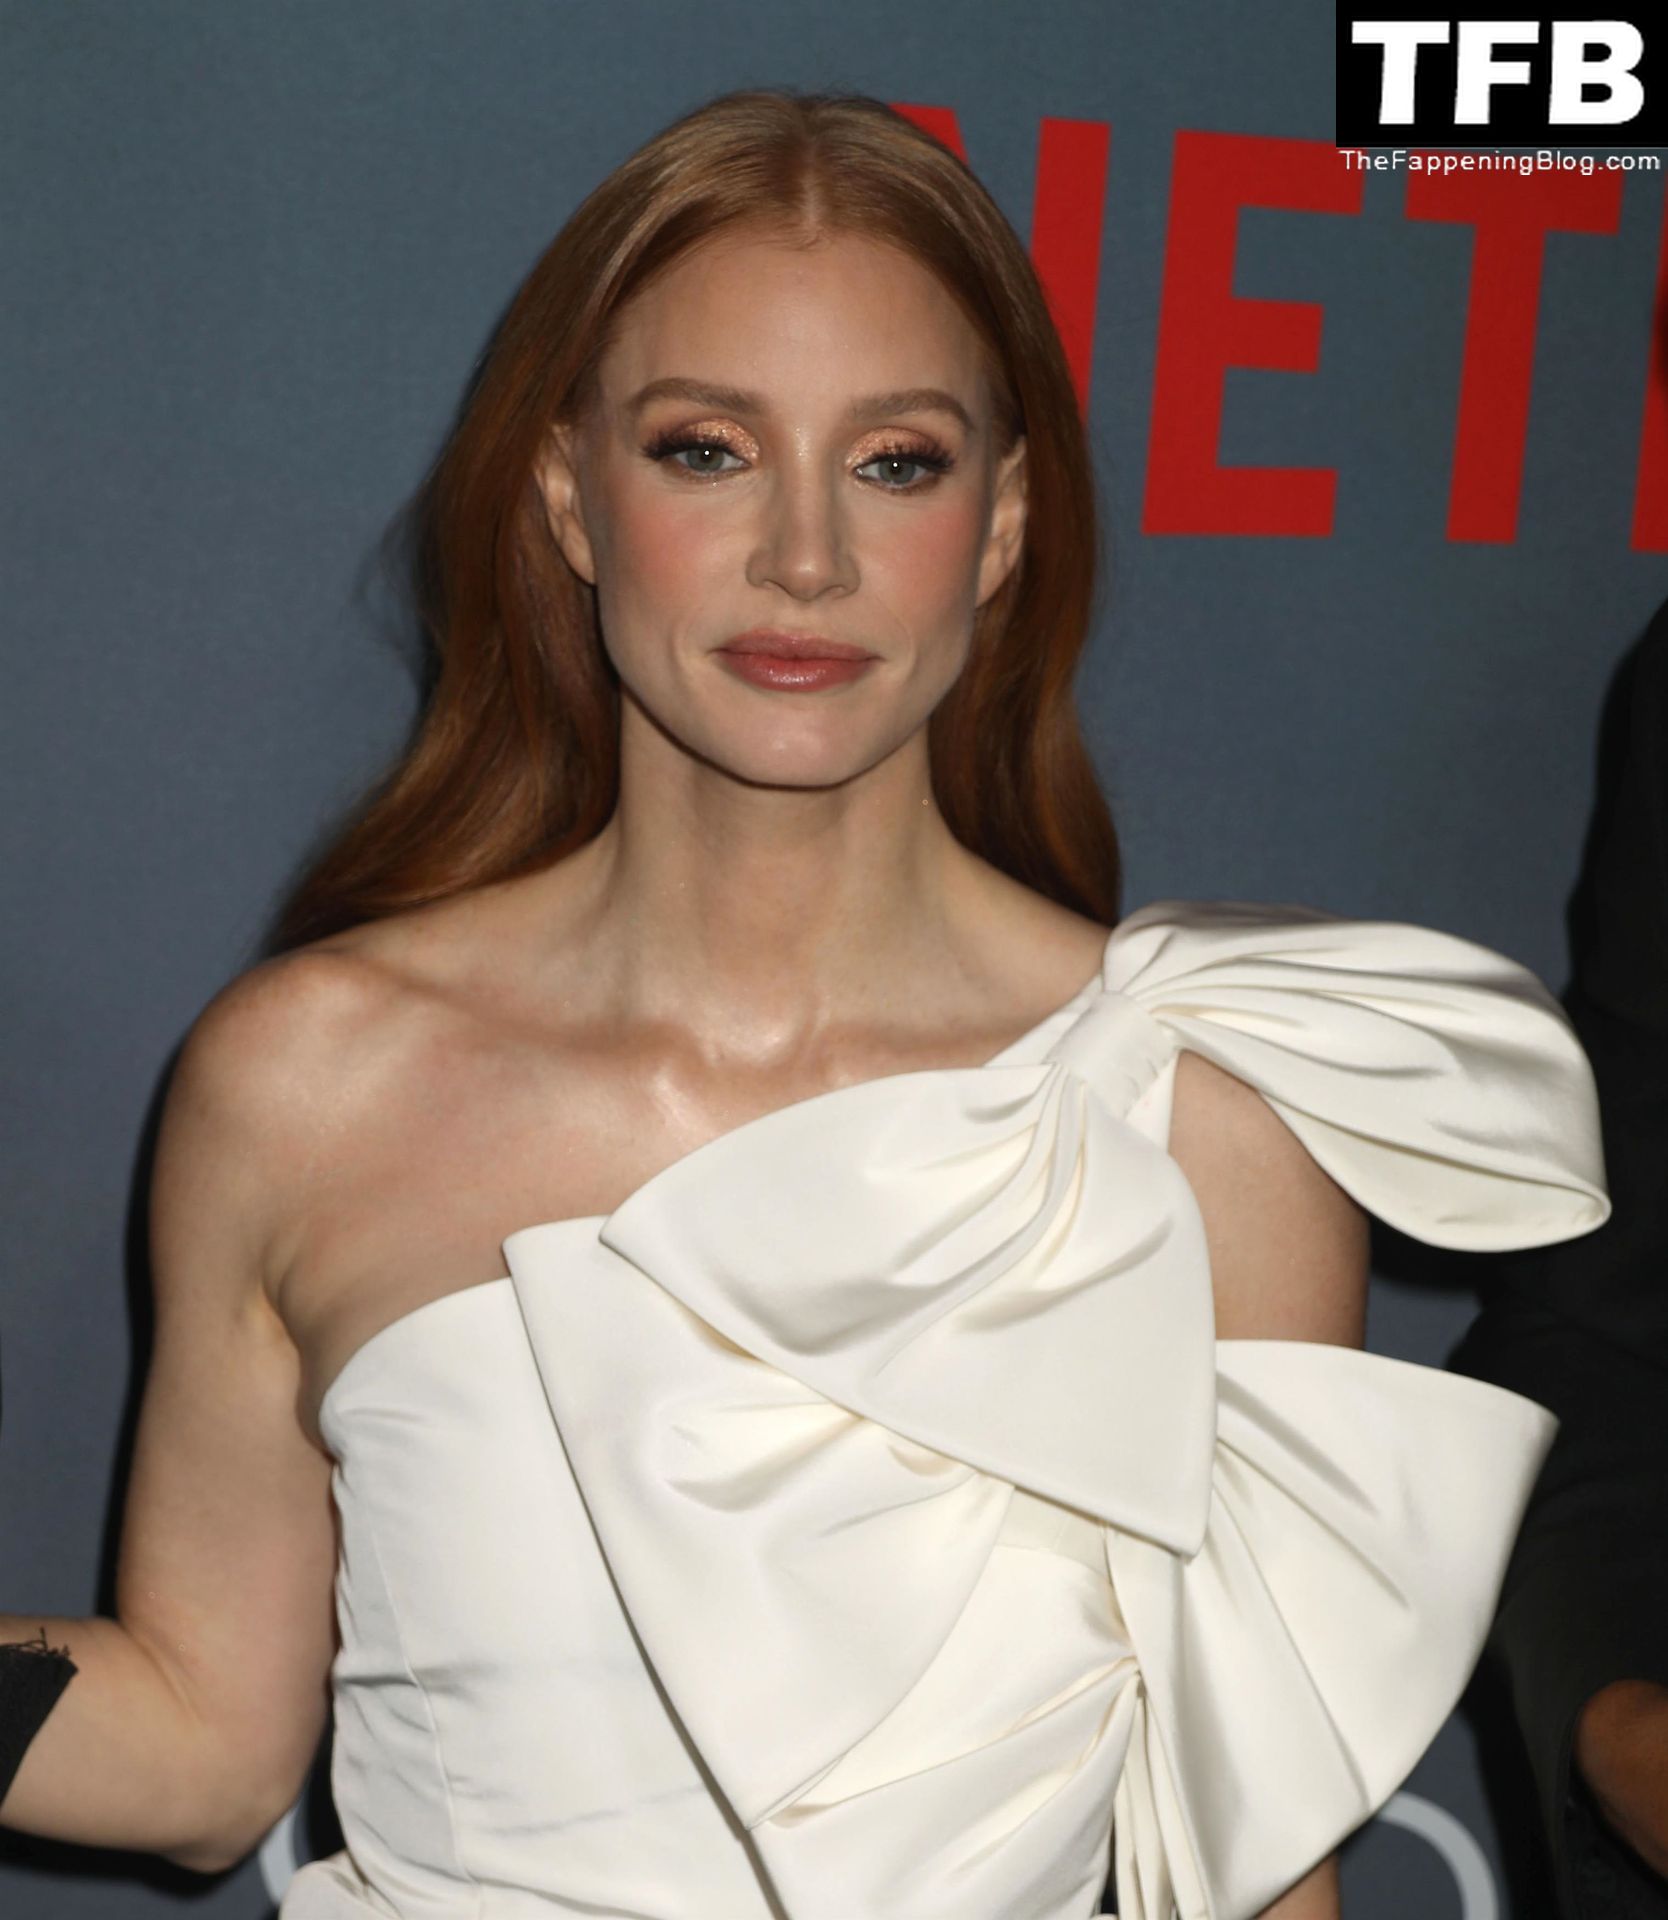 Jessica-Chastain-Sexy-The-Fappening-Blog-56-1.jpg